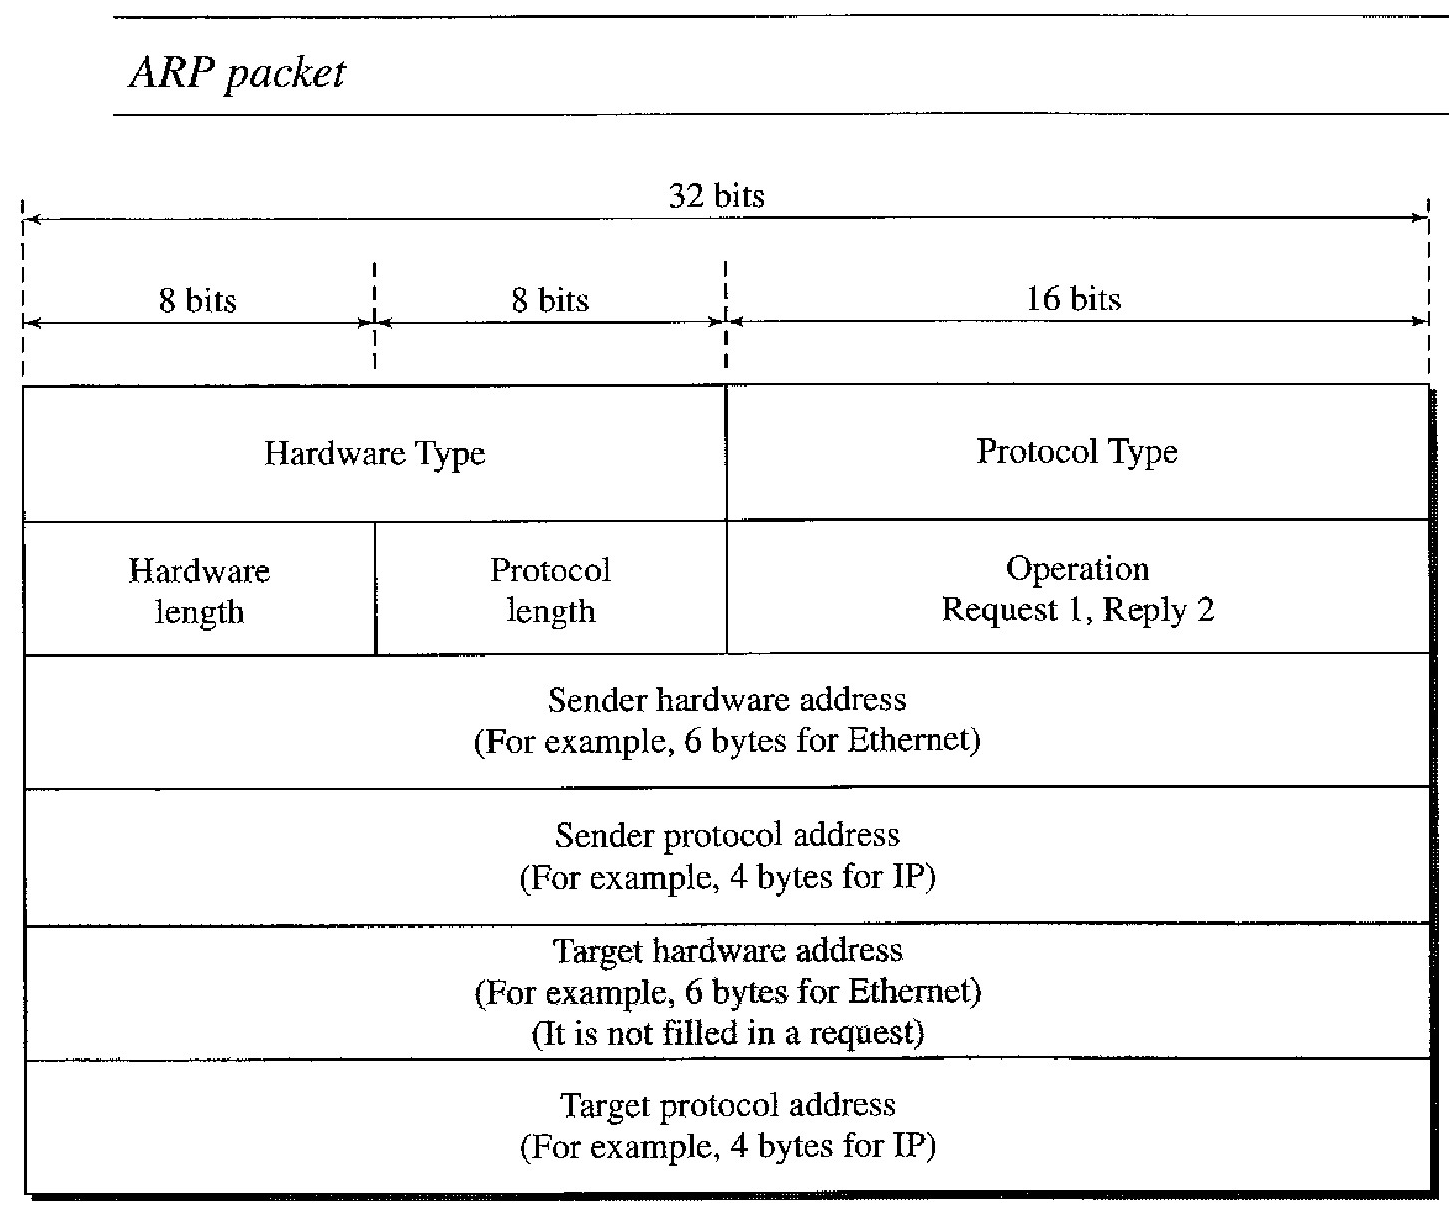 The format of an ARP packet.